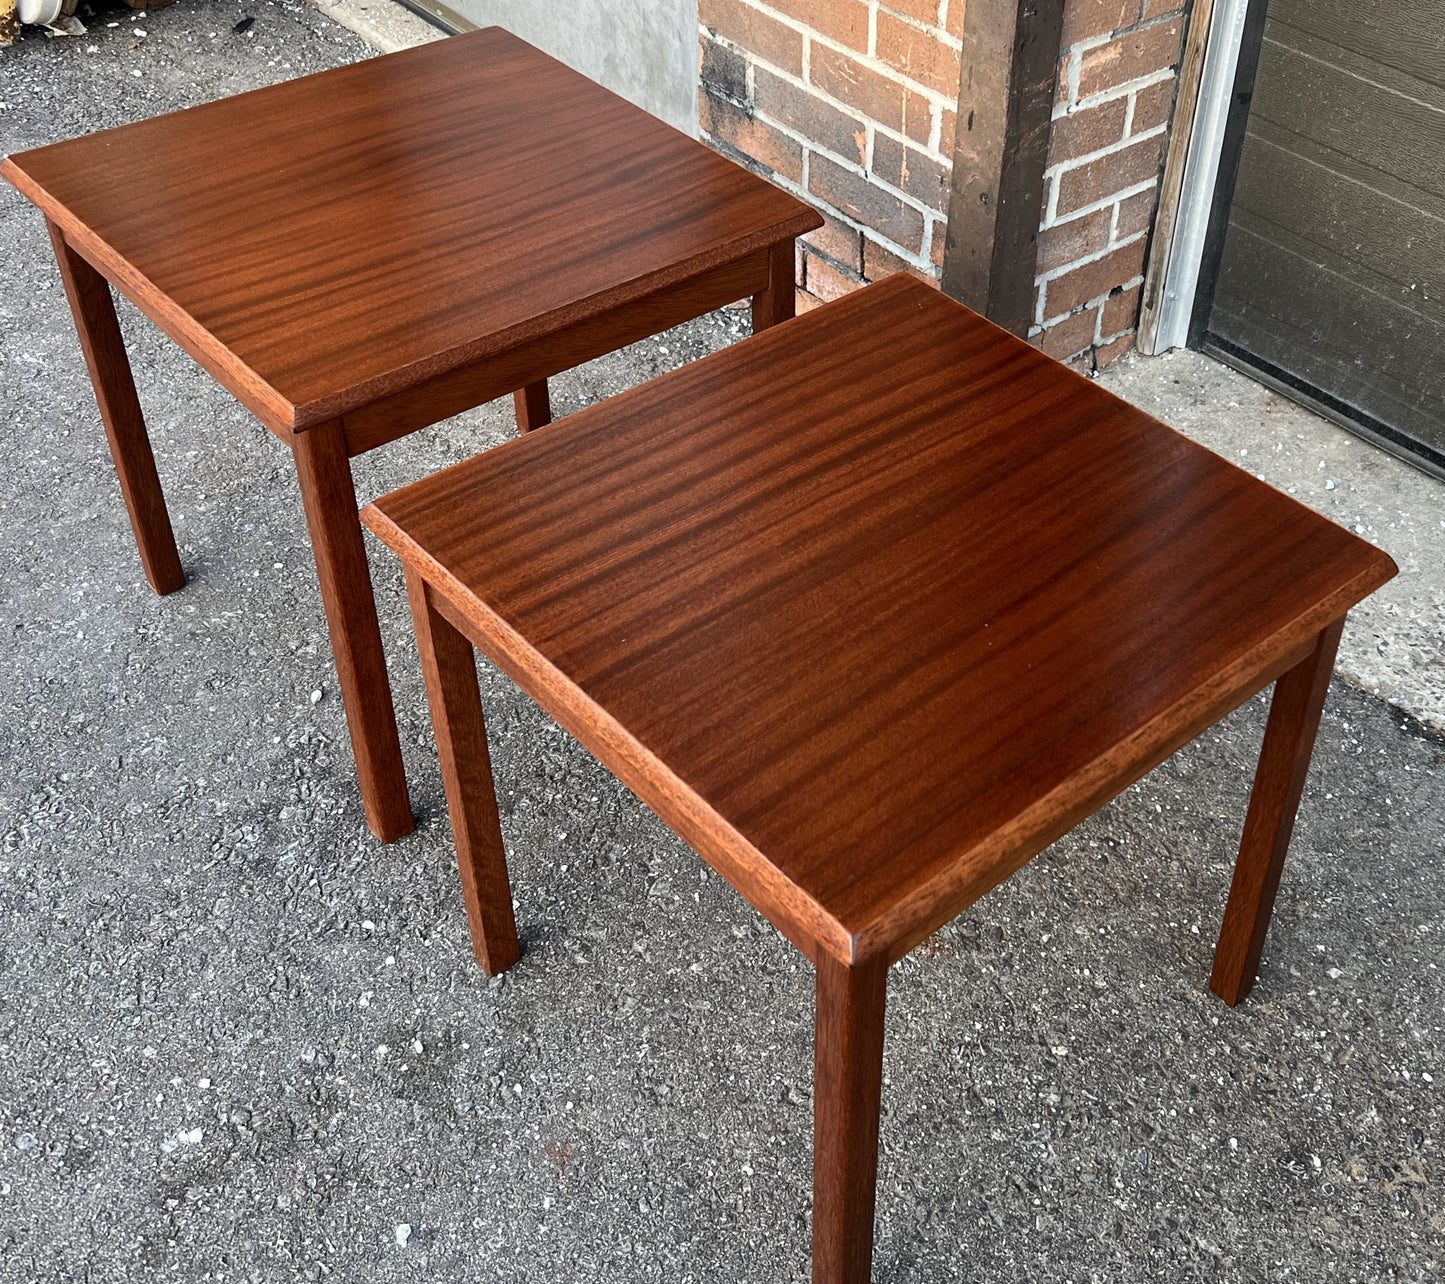 REFINISHED Danish Mid Century Modern coffee table & 2 end tables